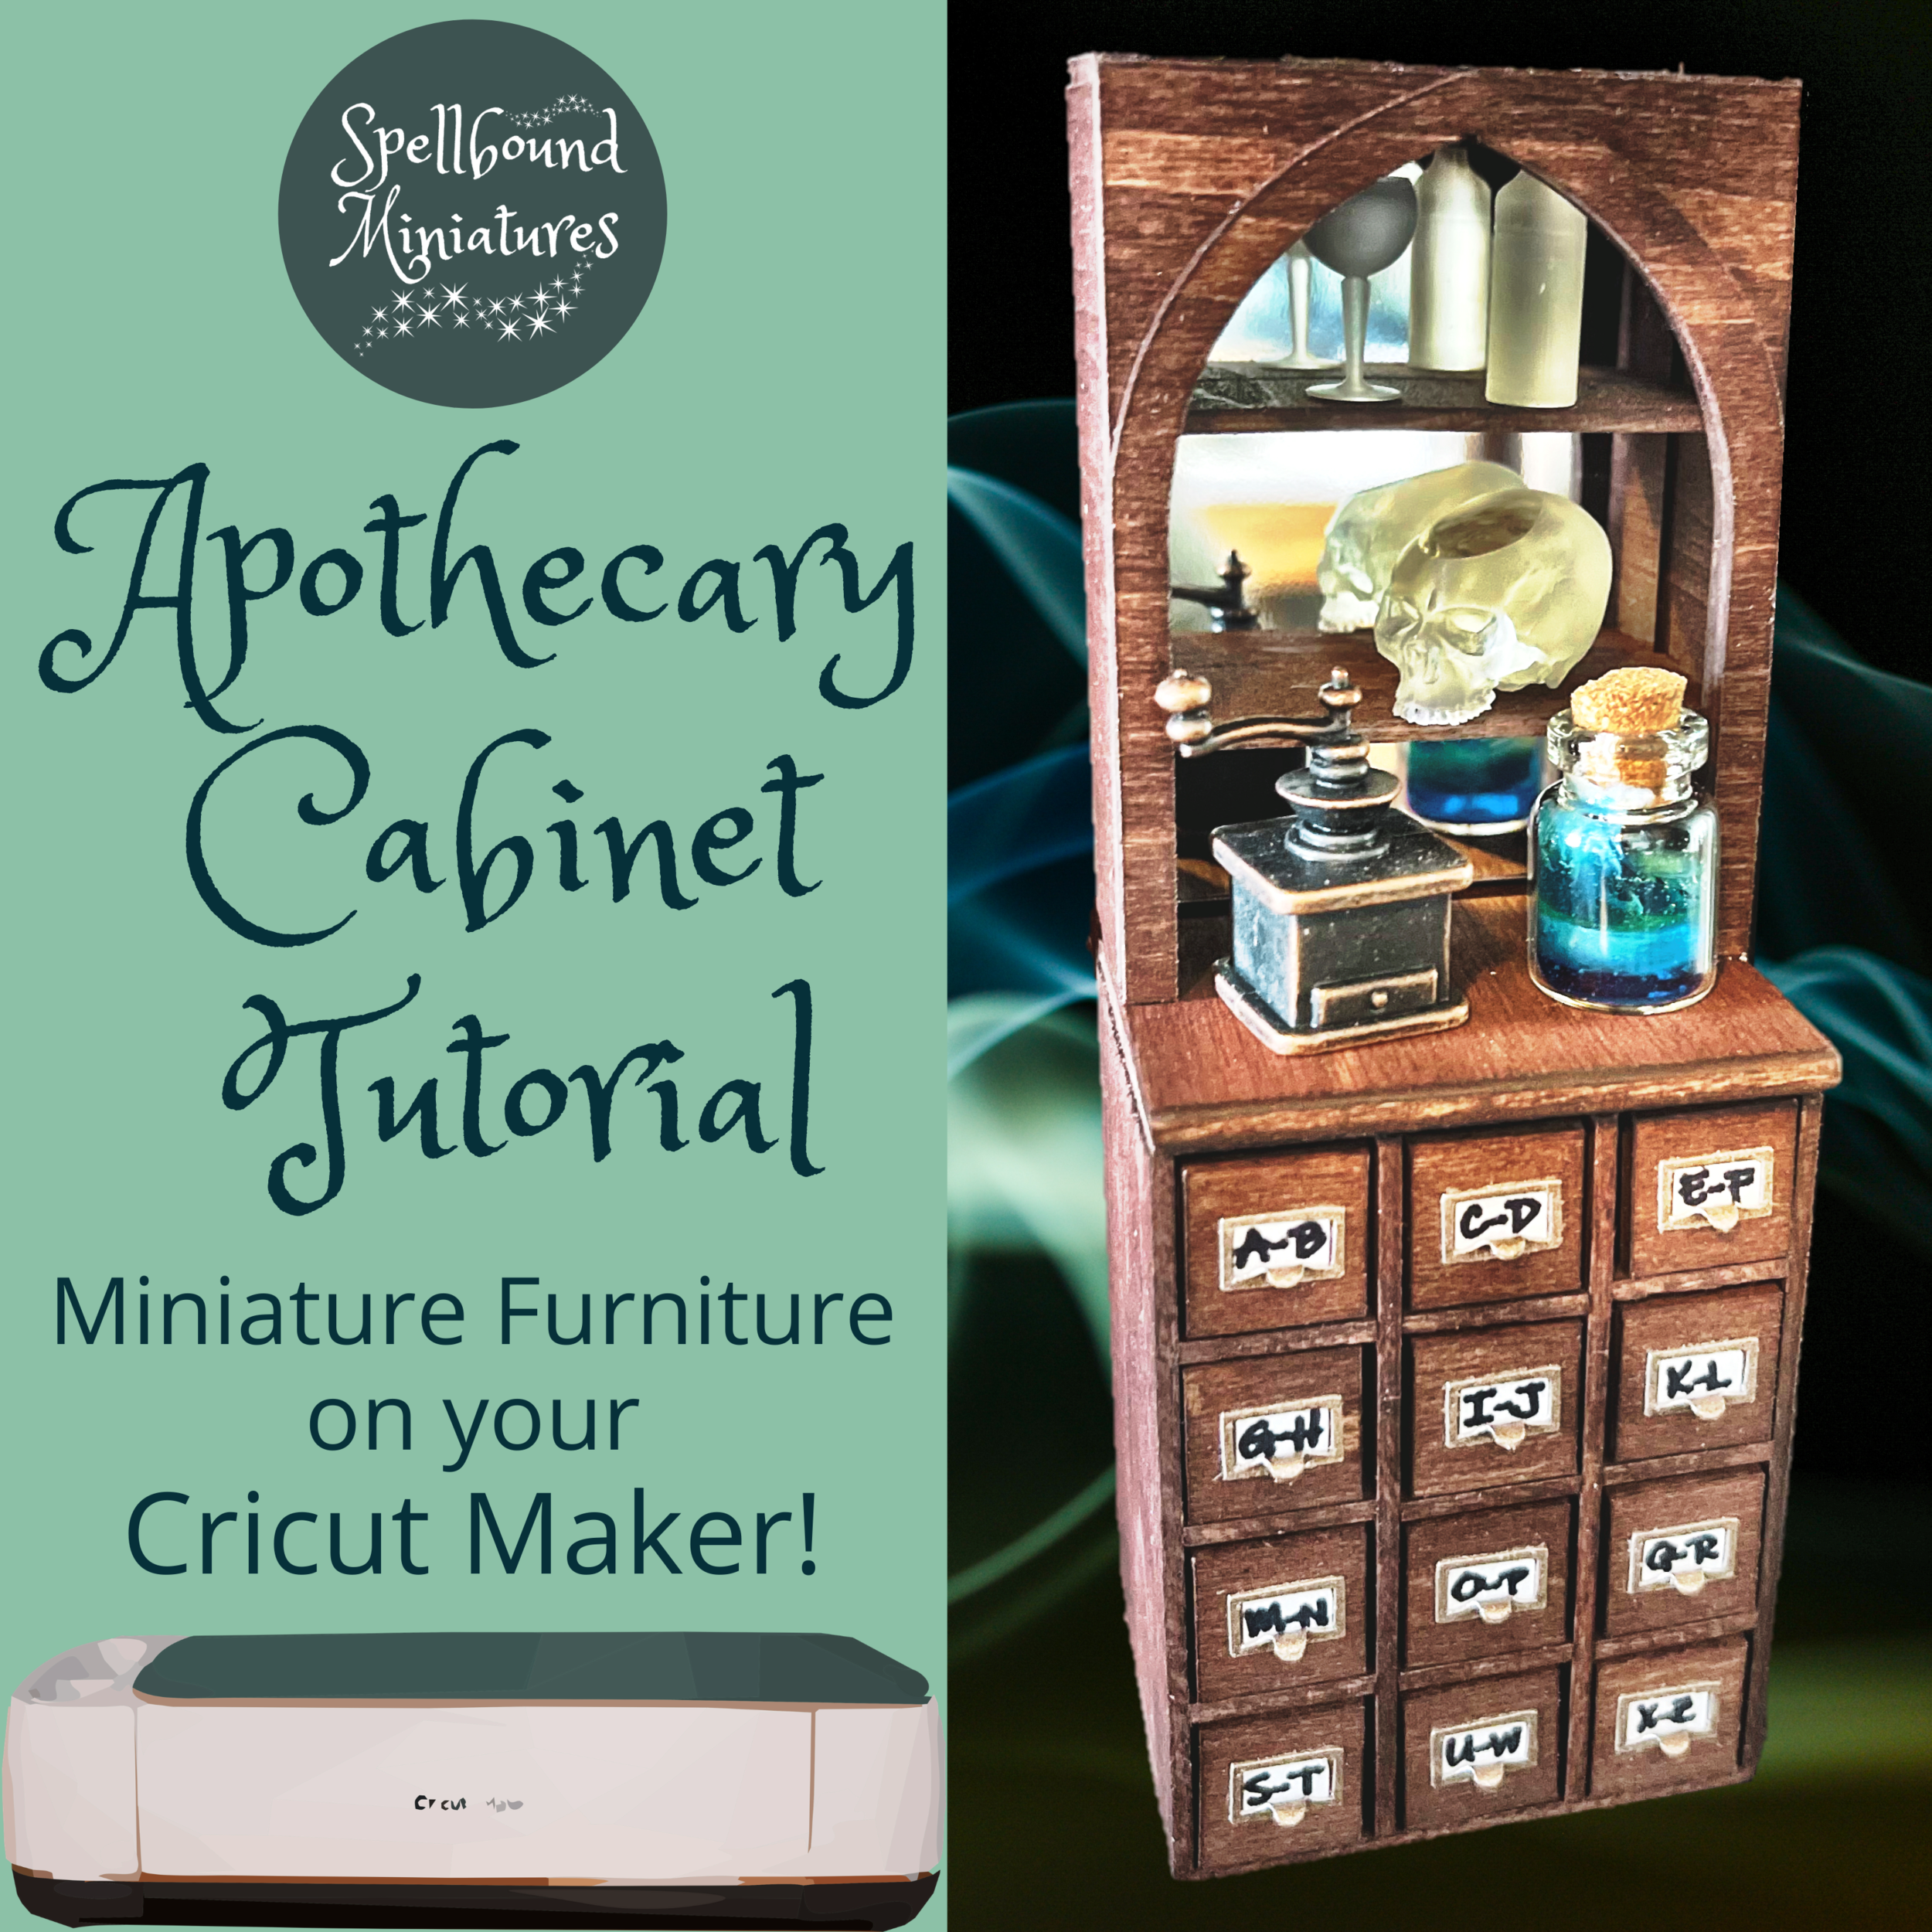 Miniature Apothecary Cabinet Travel Kit [CCK 087]